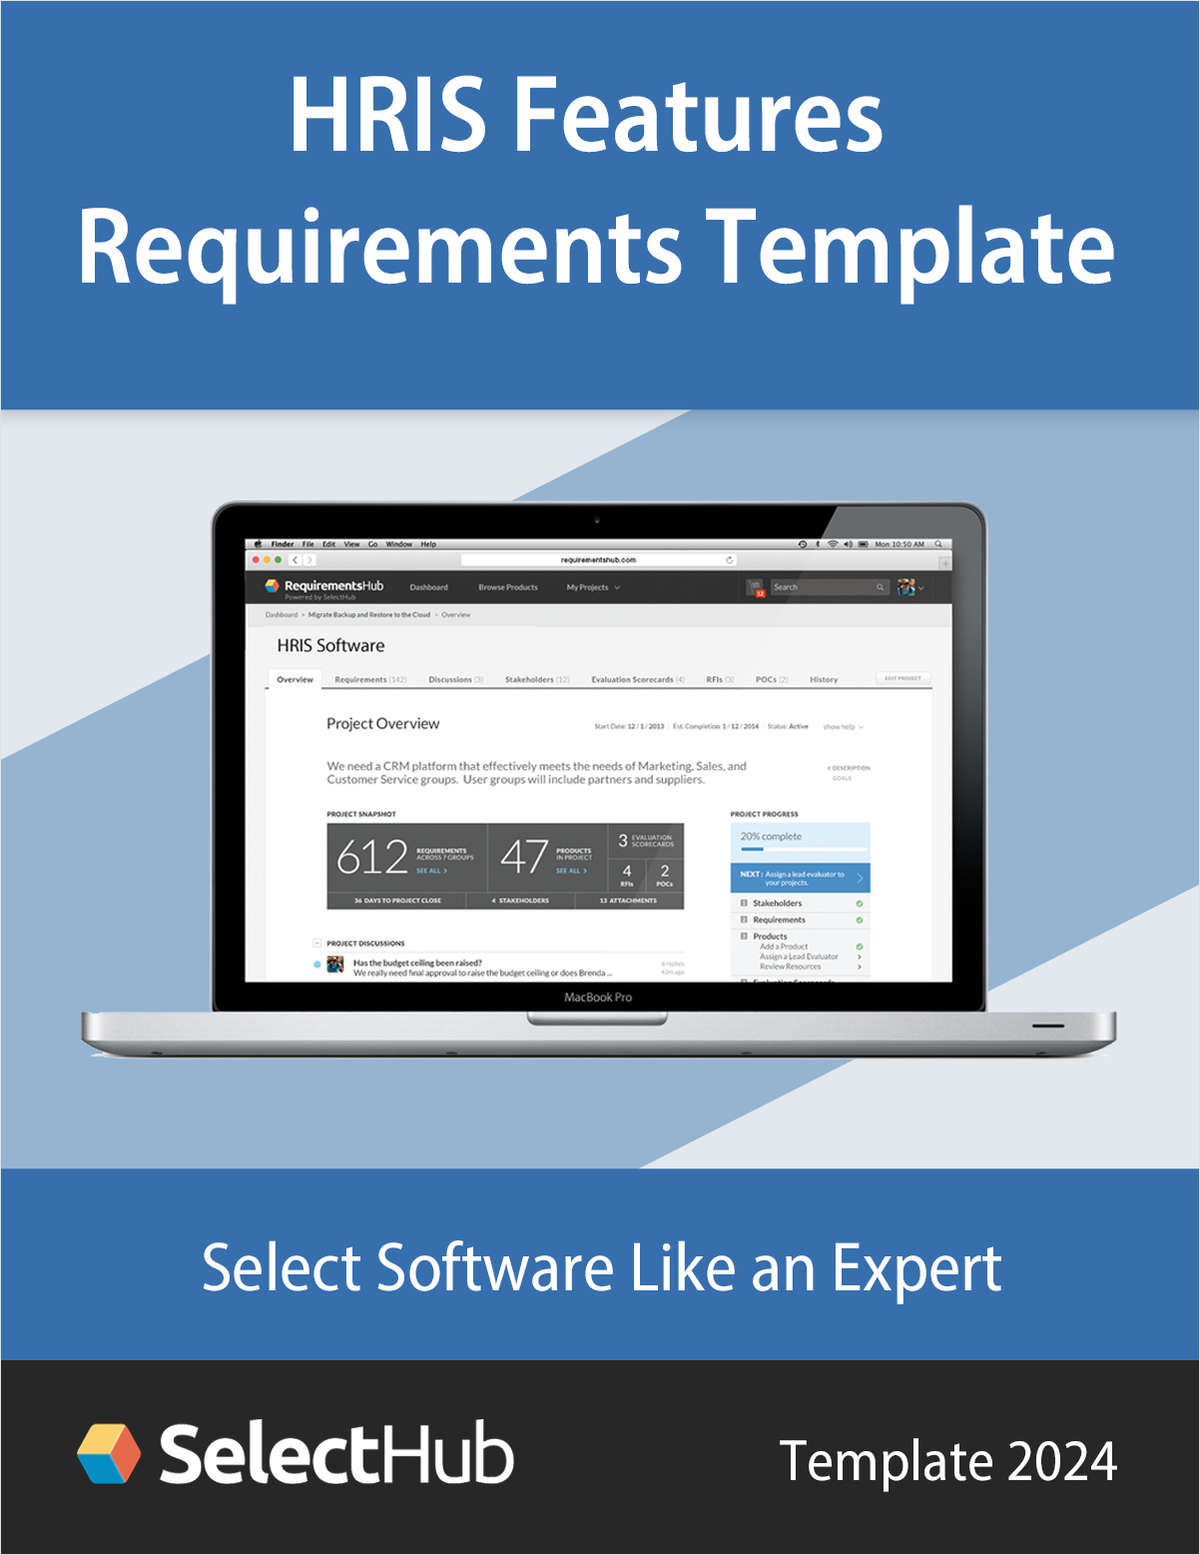 Complete HRIS Features Requirements Template for a New HR Software Acquisition